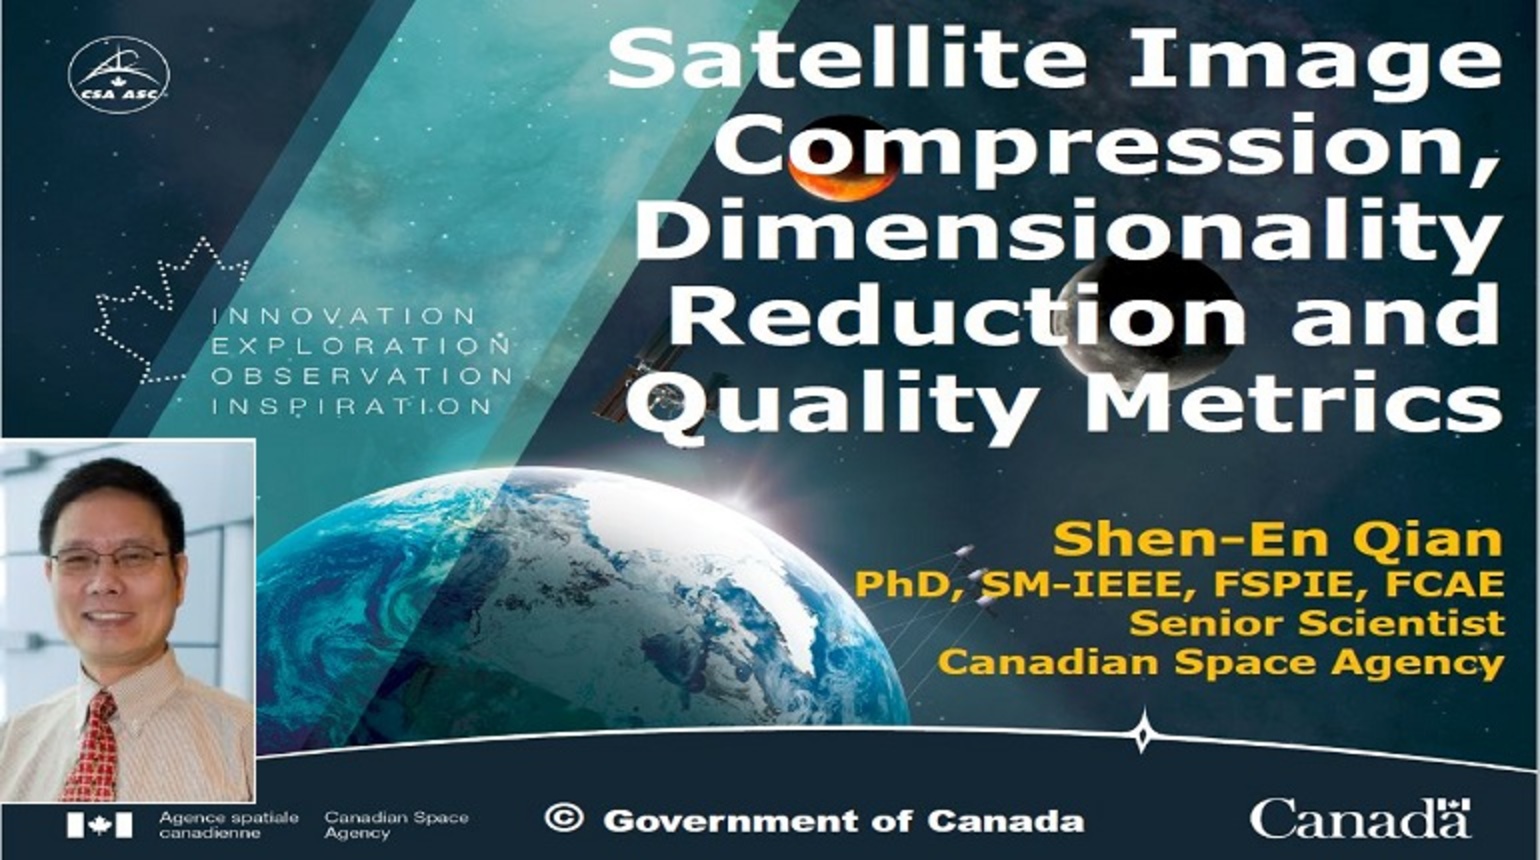 Satellite Image Compression, Dimensionality Reduction and Quality Metrics